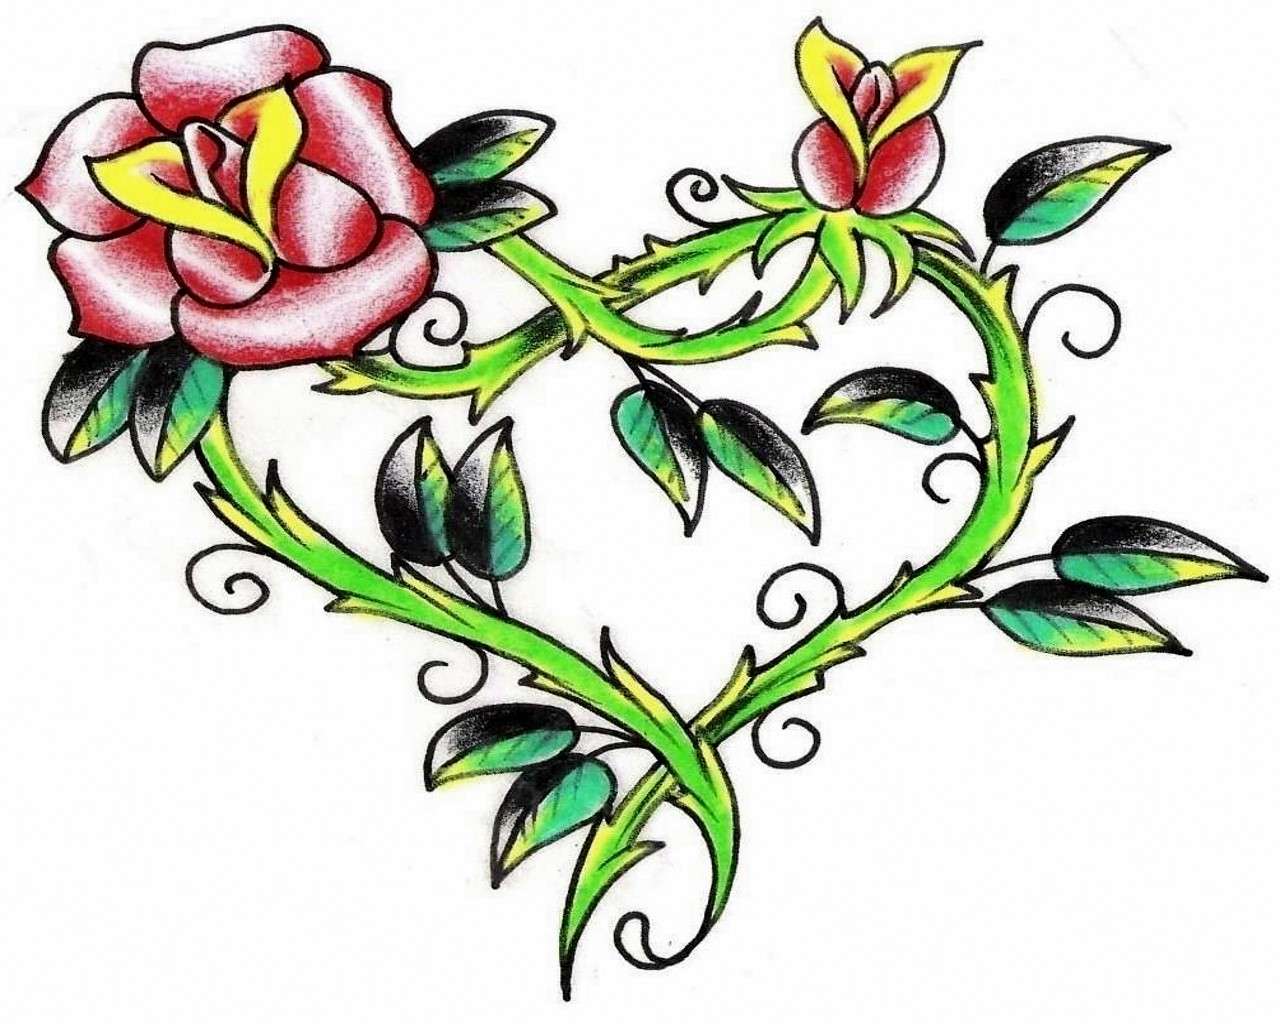 Tattoo Coloring Book For Adult : Classic Mom Heart and flowers Old School  Tattoo art An Coloring Book For Relaxation with Awesome Modern Tattoo  Designs (Paperback) - Walmart.com